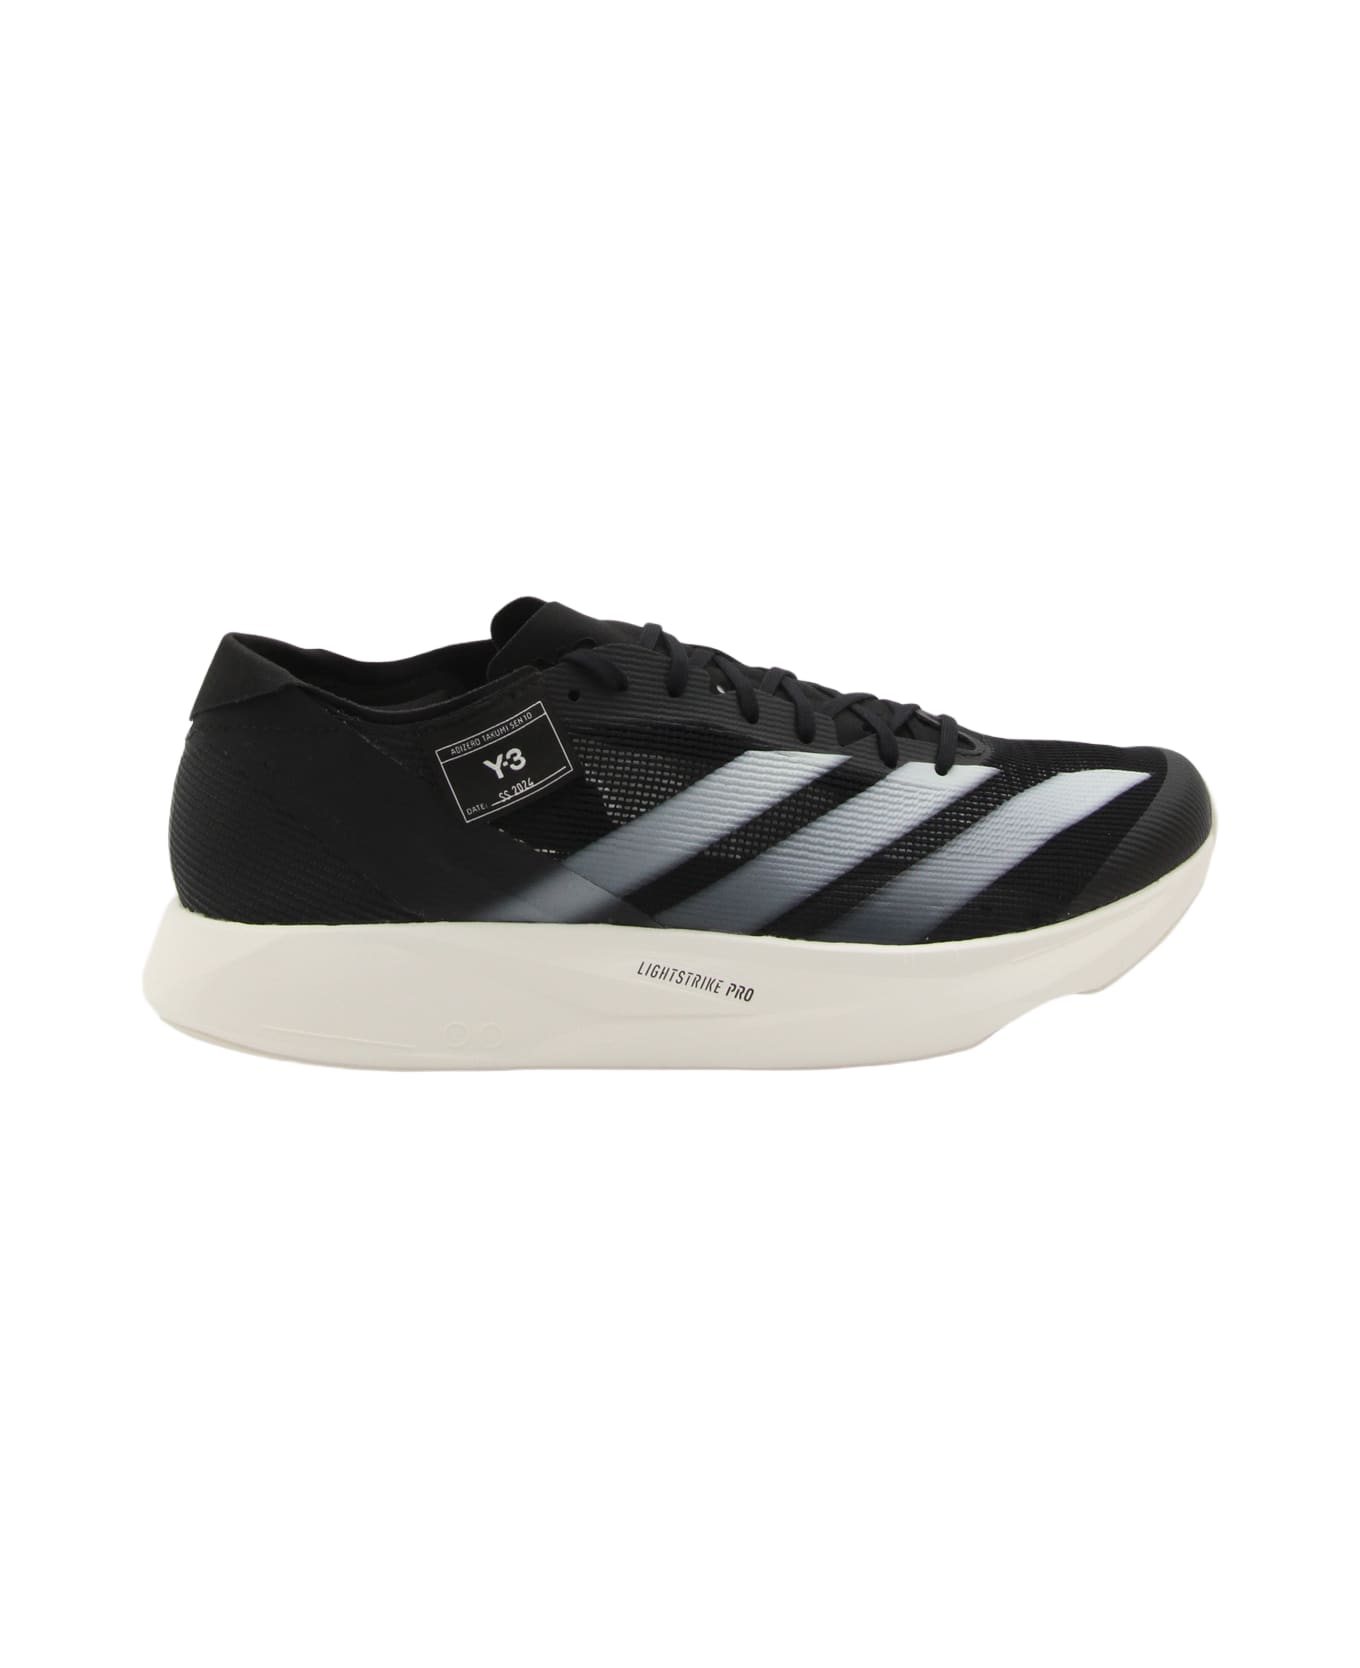 Y-3 Black And White Canvas Sneakers - black/black/off white スニーカー